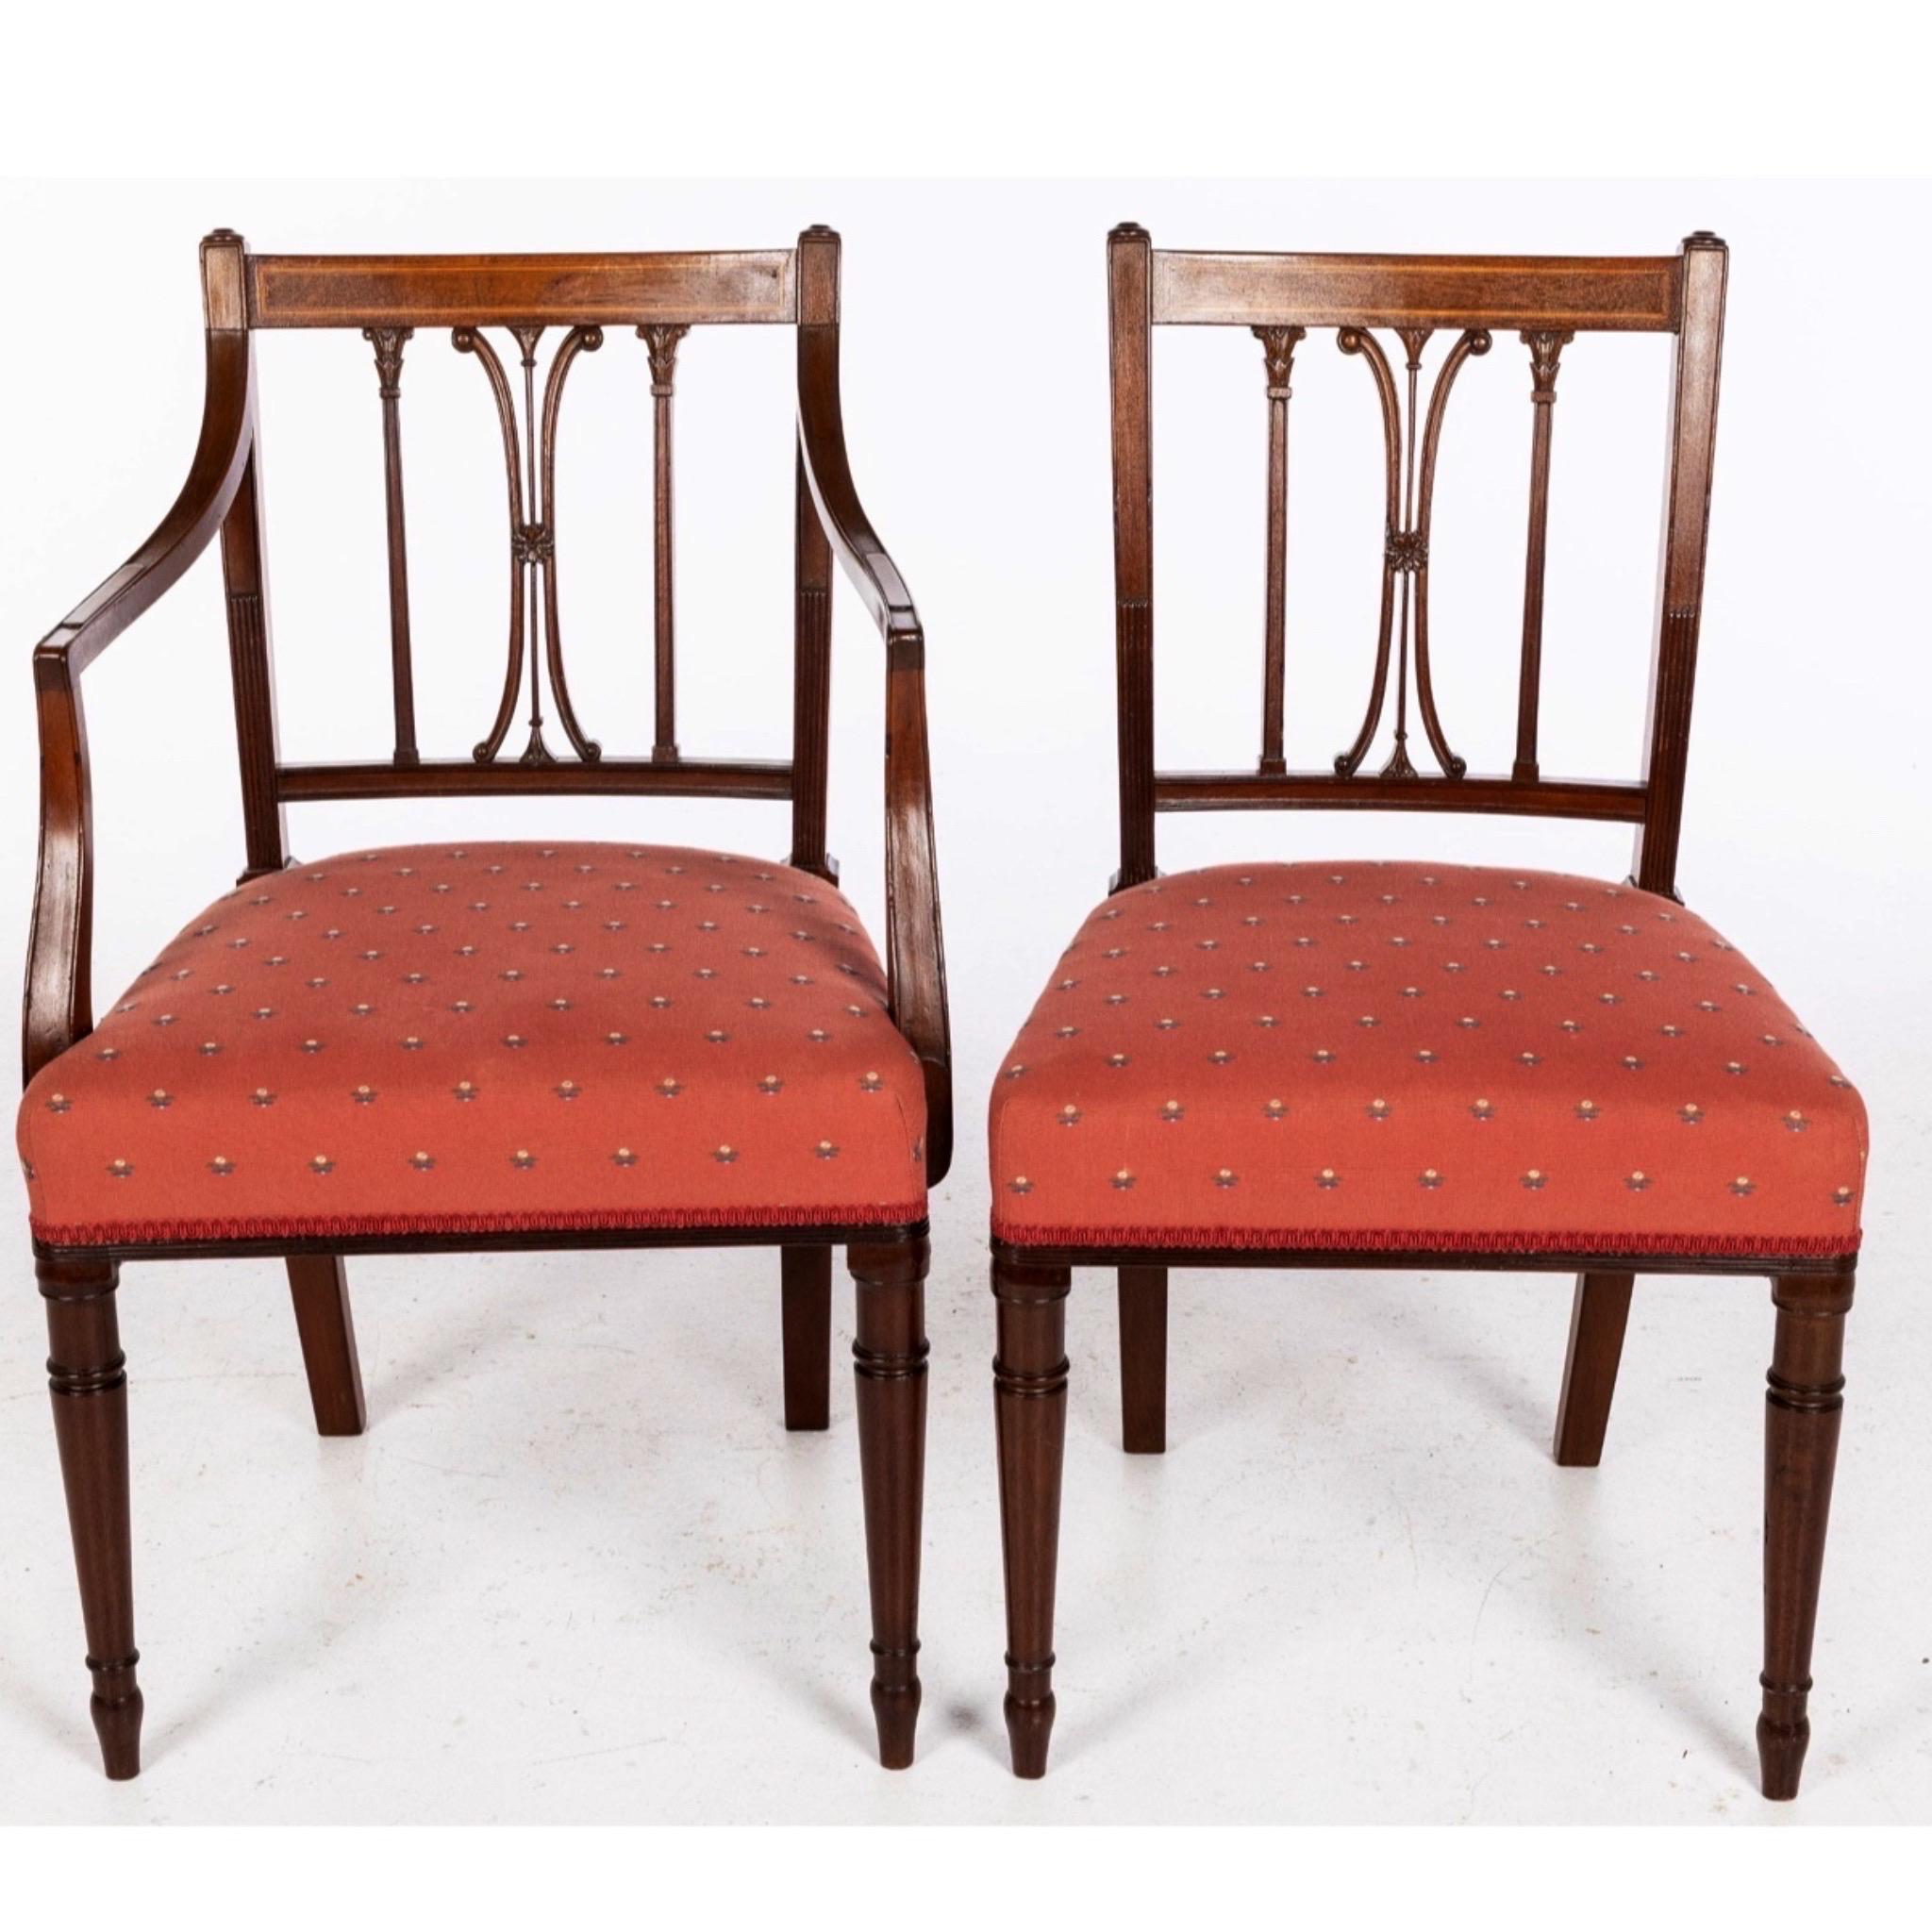 Inlay Set of 6 George III Style Mahogany Dining Chairs, 19th Century